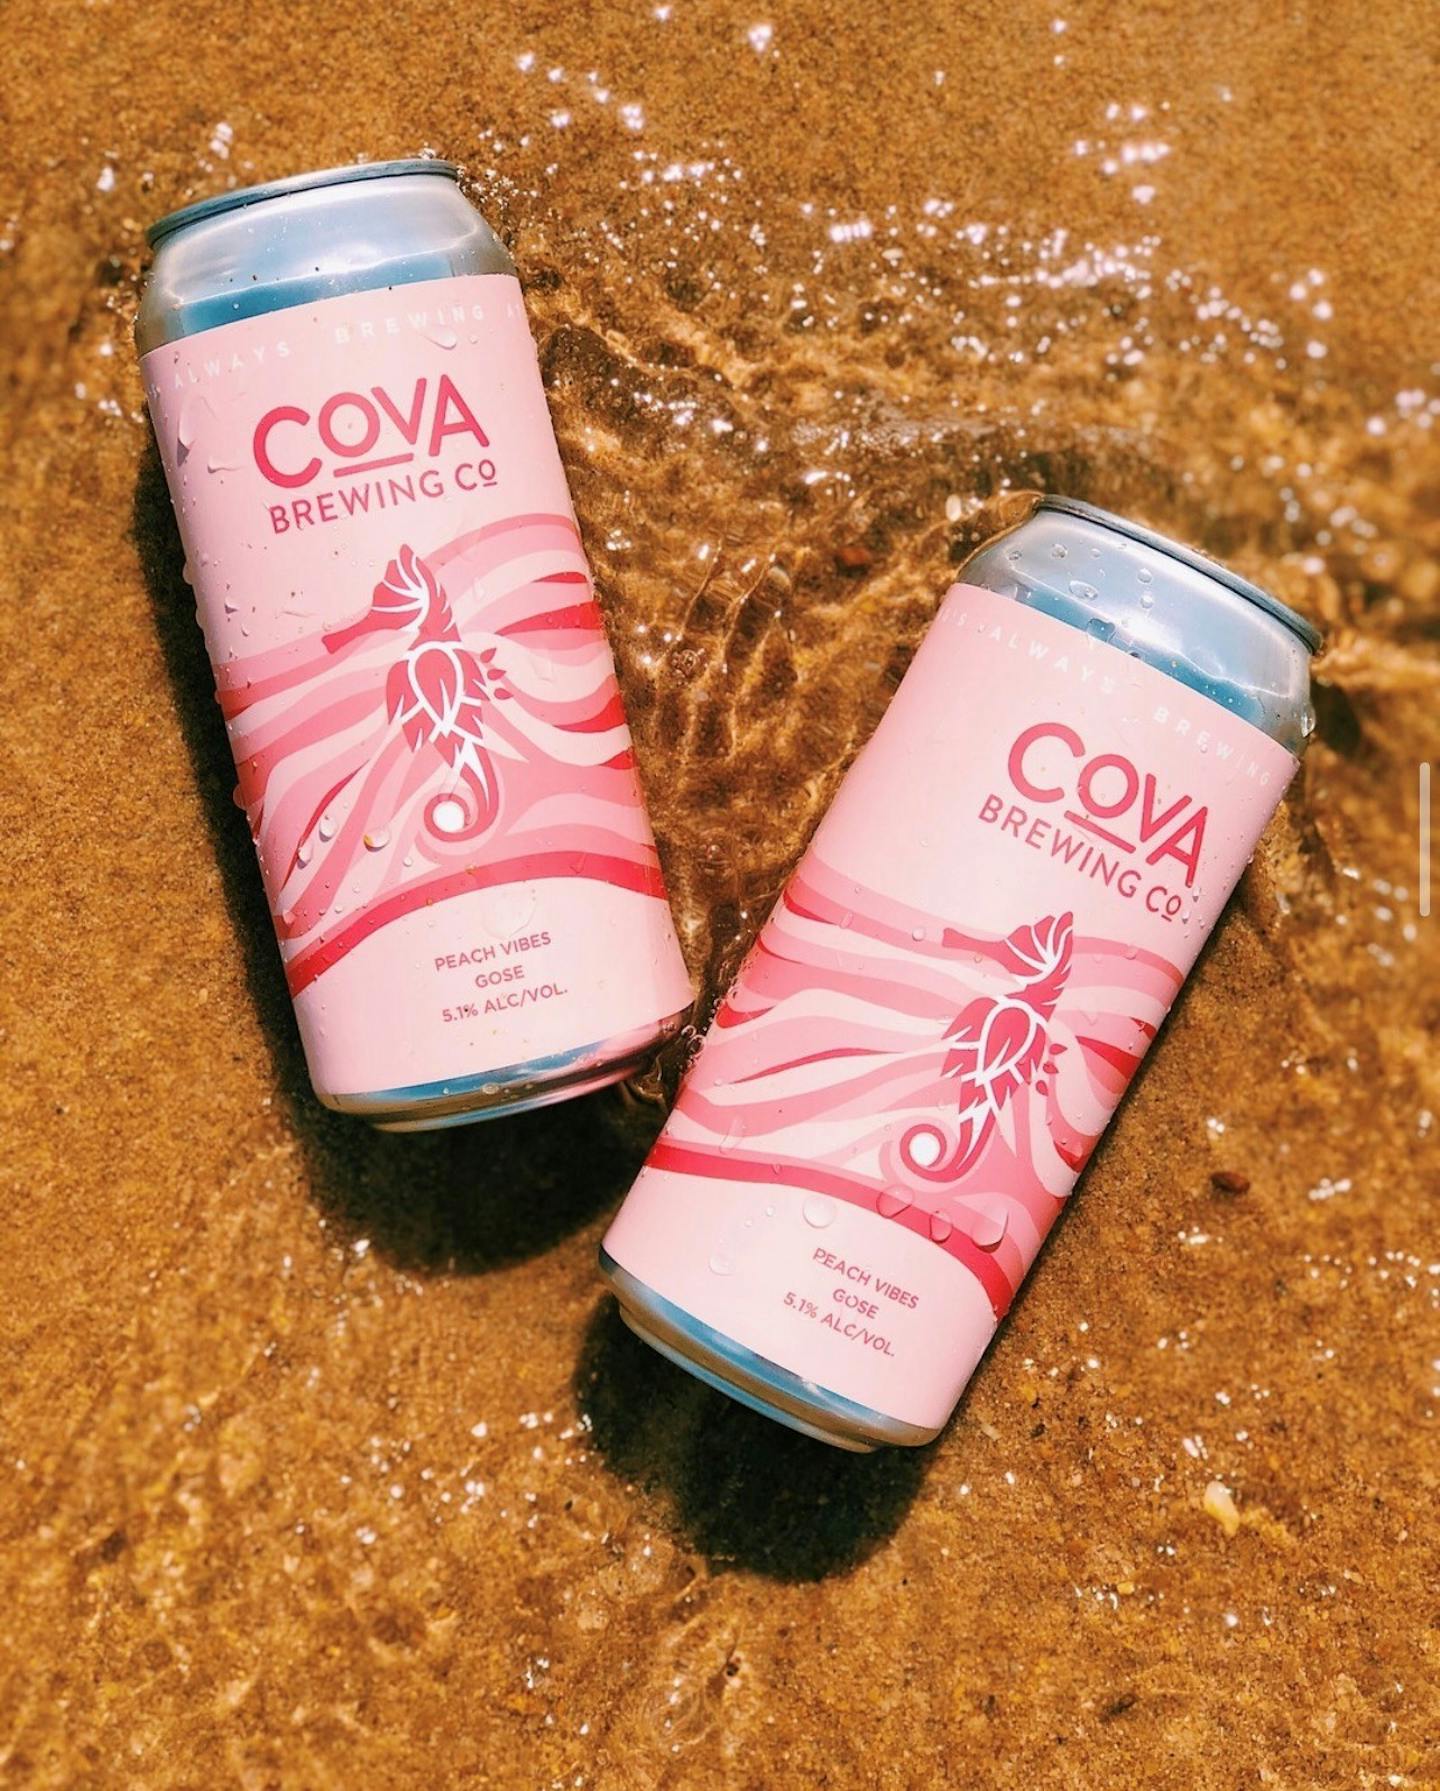 COVA Cans